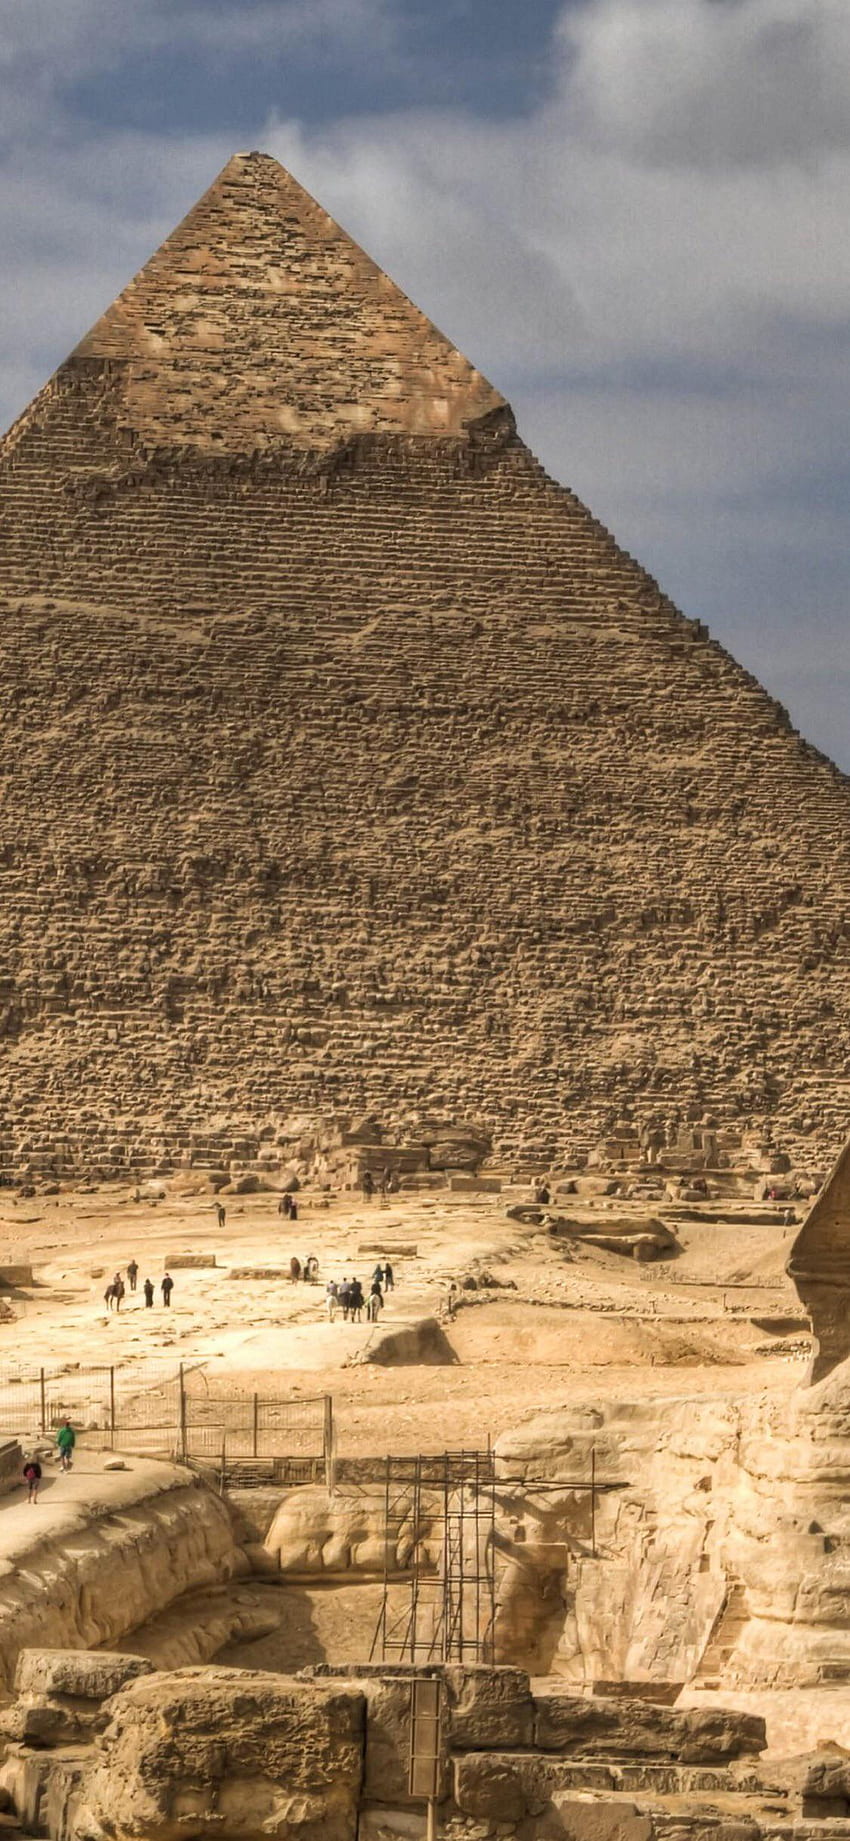 Taken from my country Egypt, Egyptian HD phone wallpaper